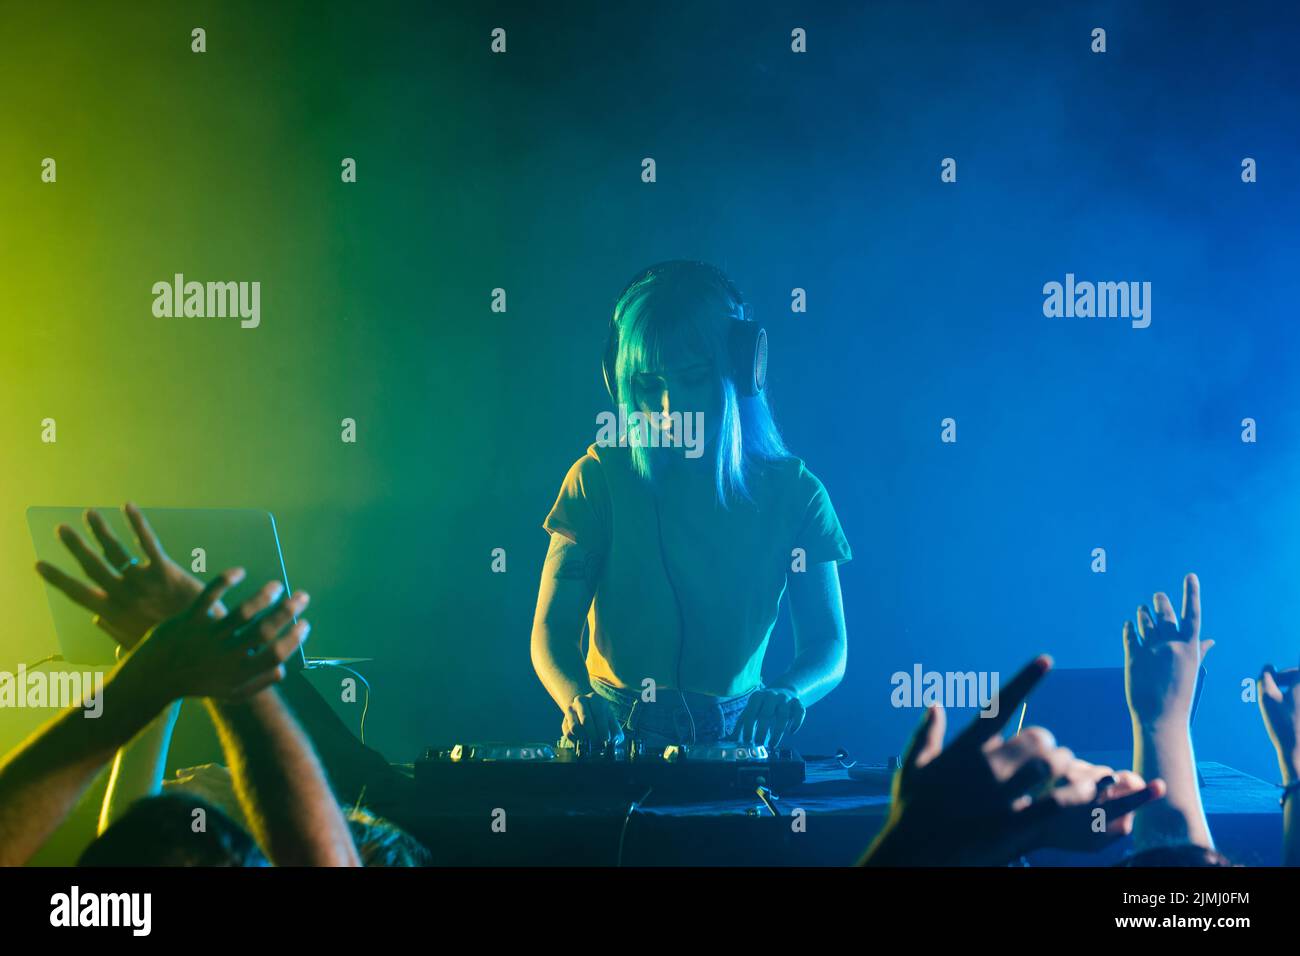 Clubbing with female dj mixing crowd Stock Photo